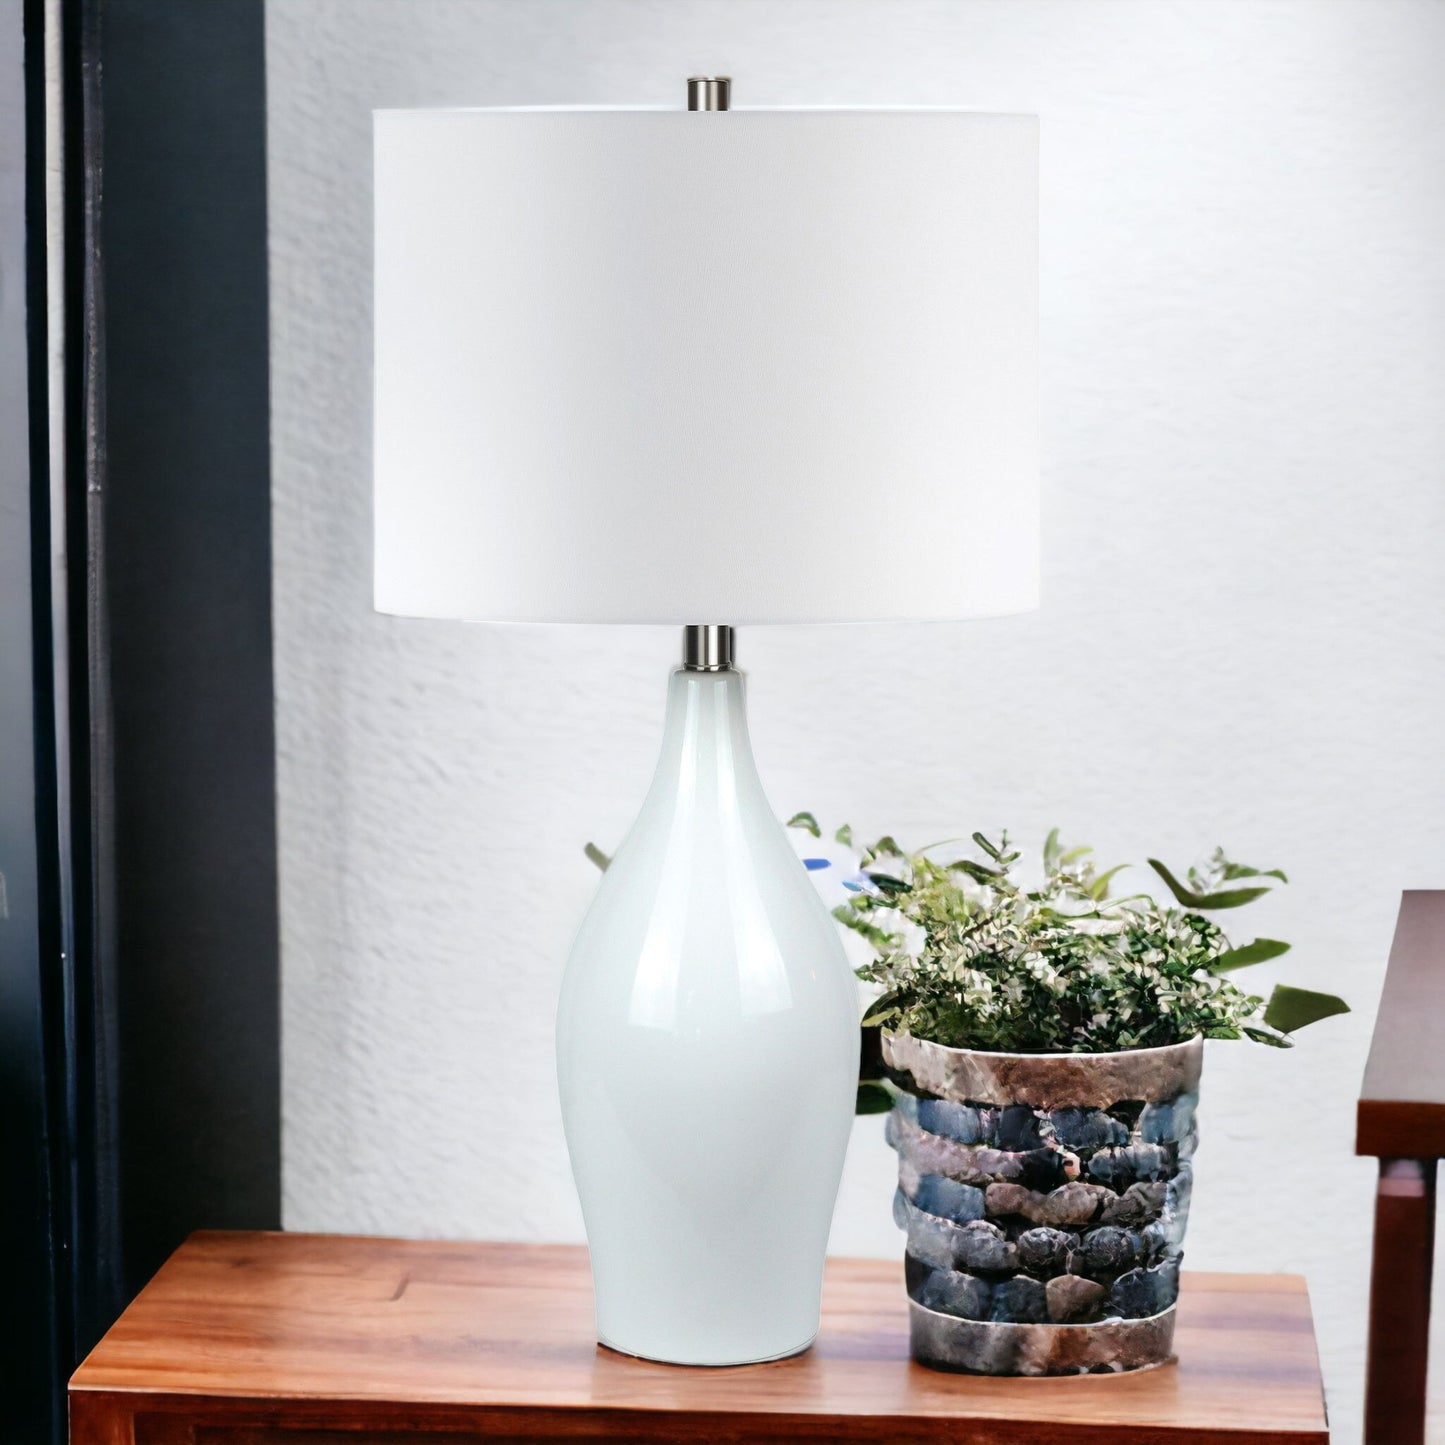 28" White Porcelain Table Lamp With White Drum Shade